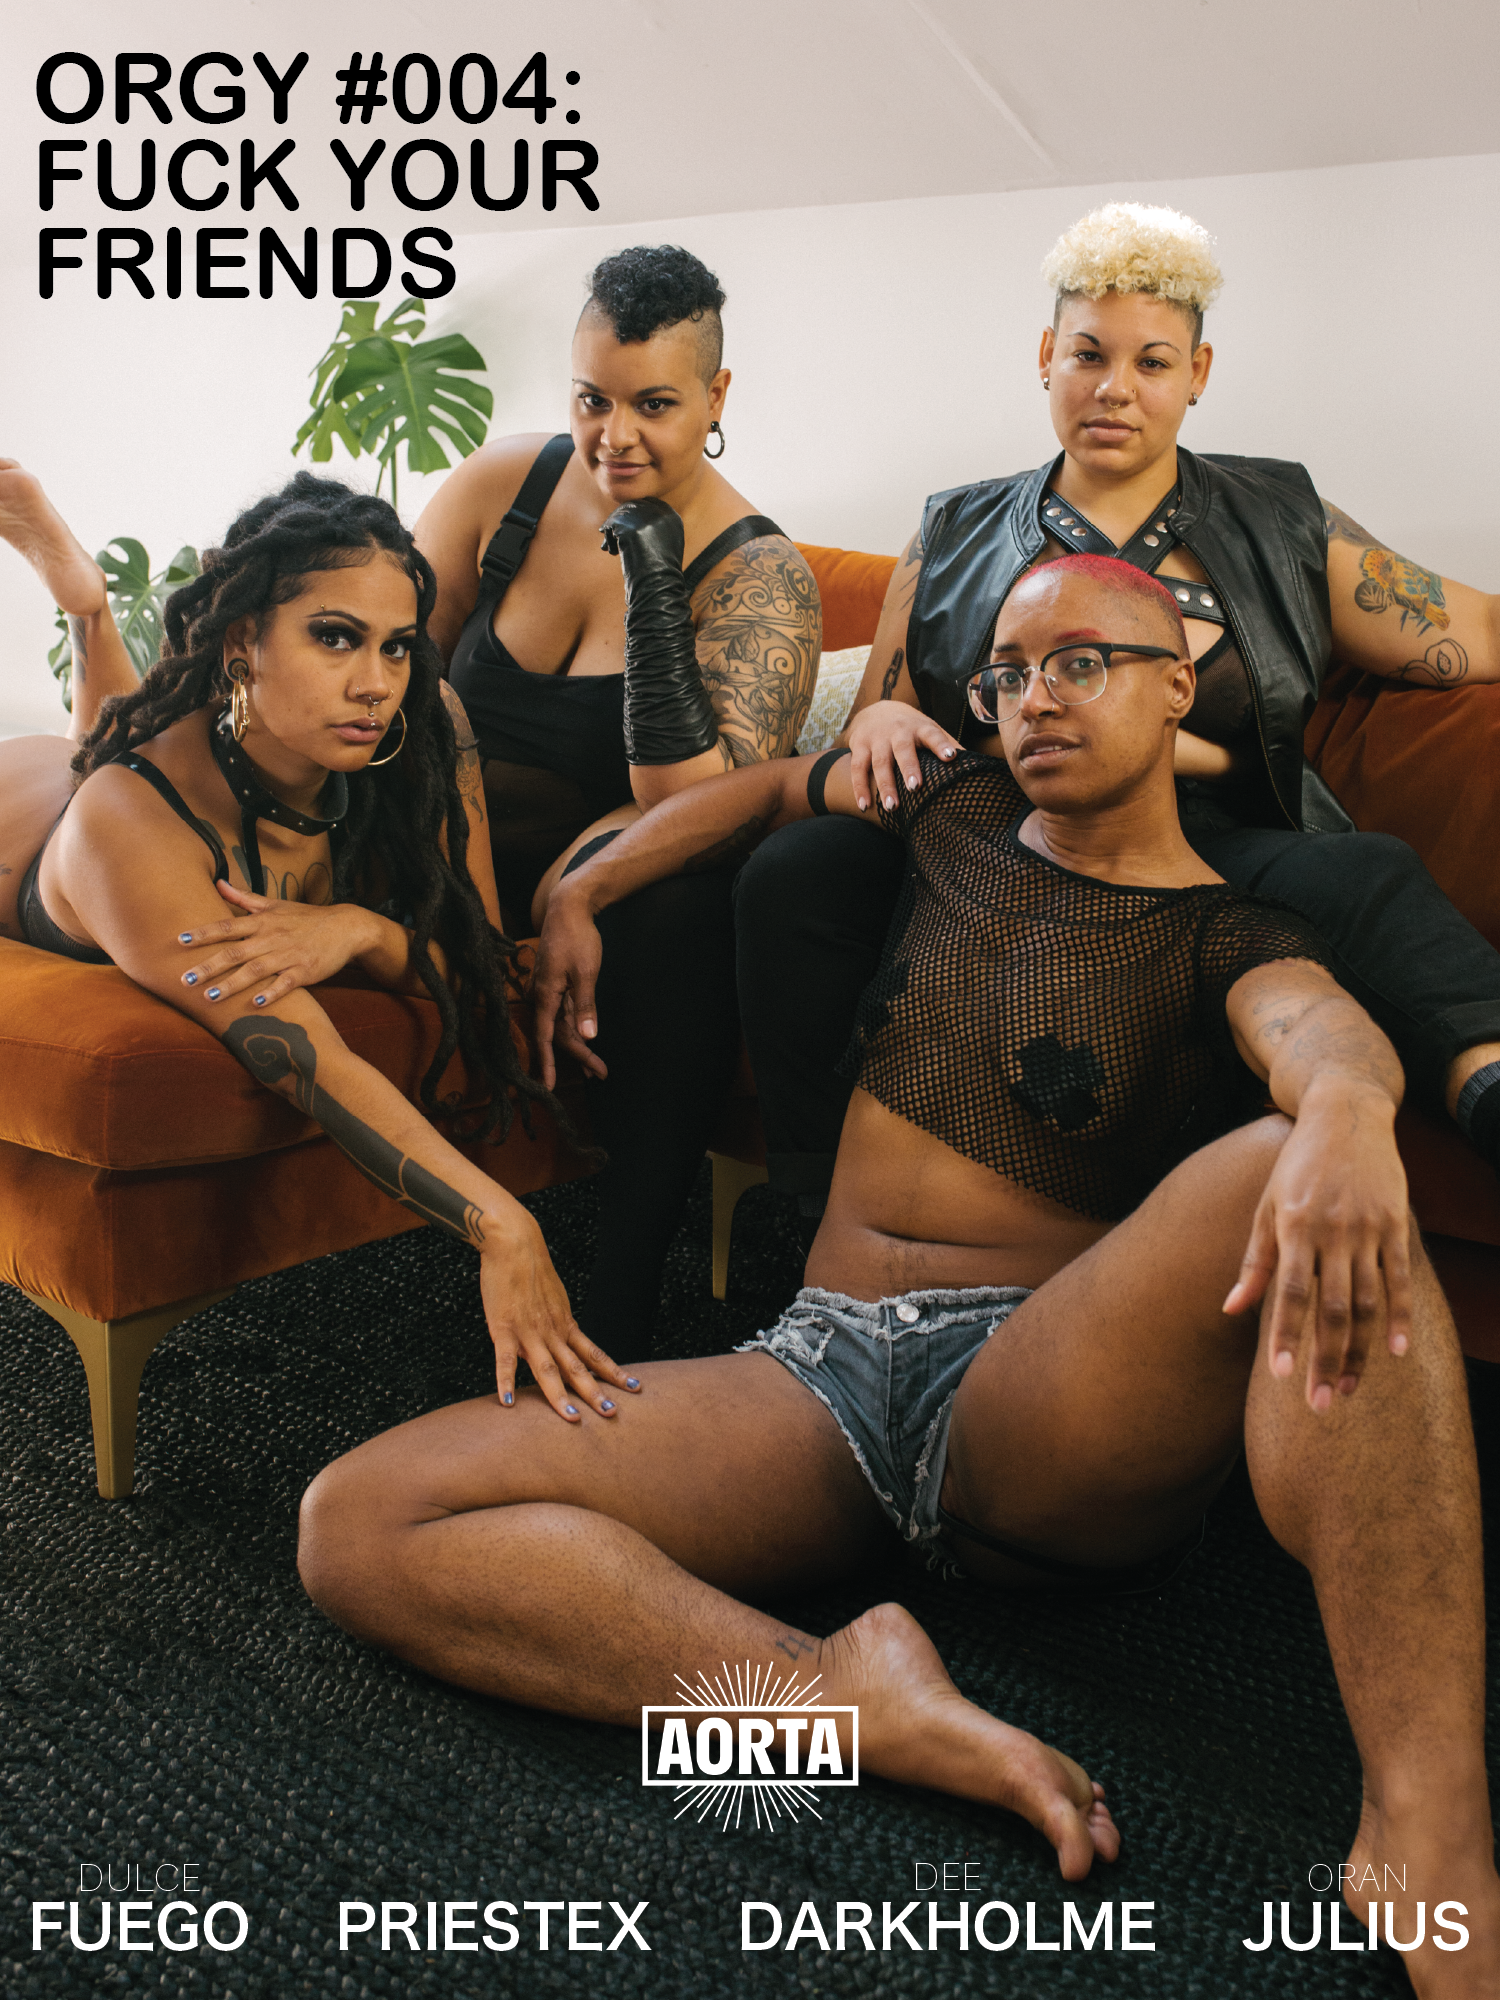 Orgy #004: Fuck your Friends